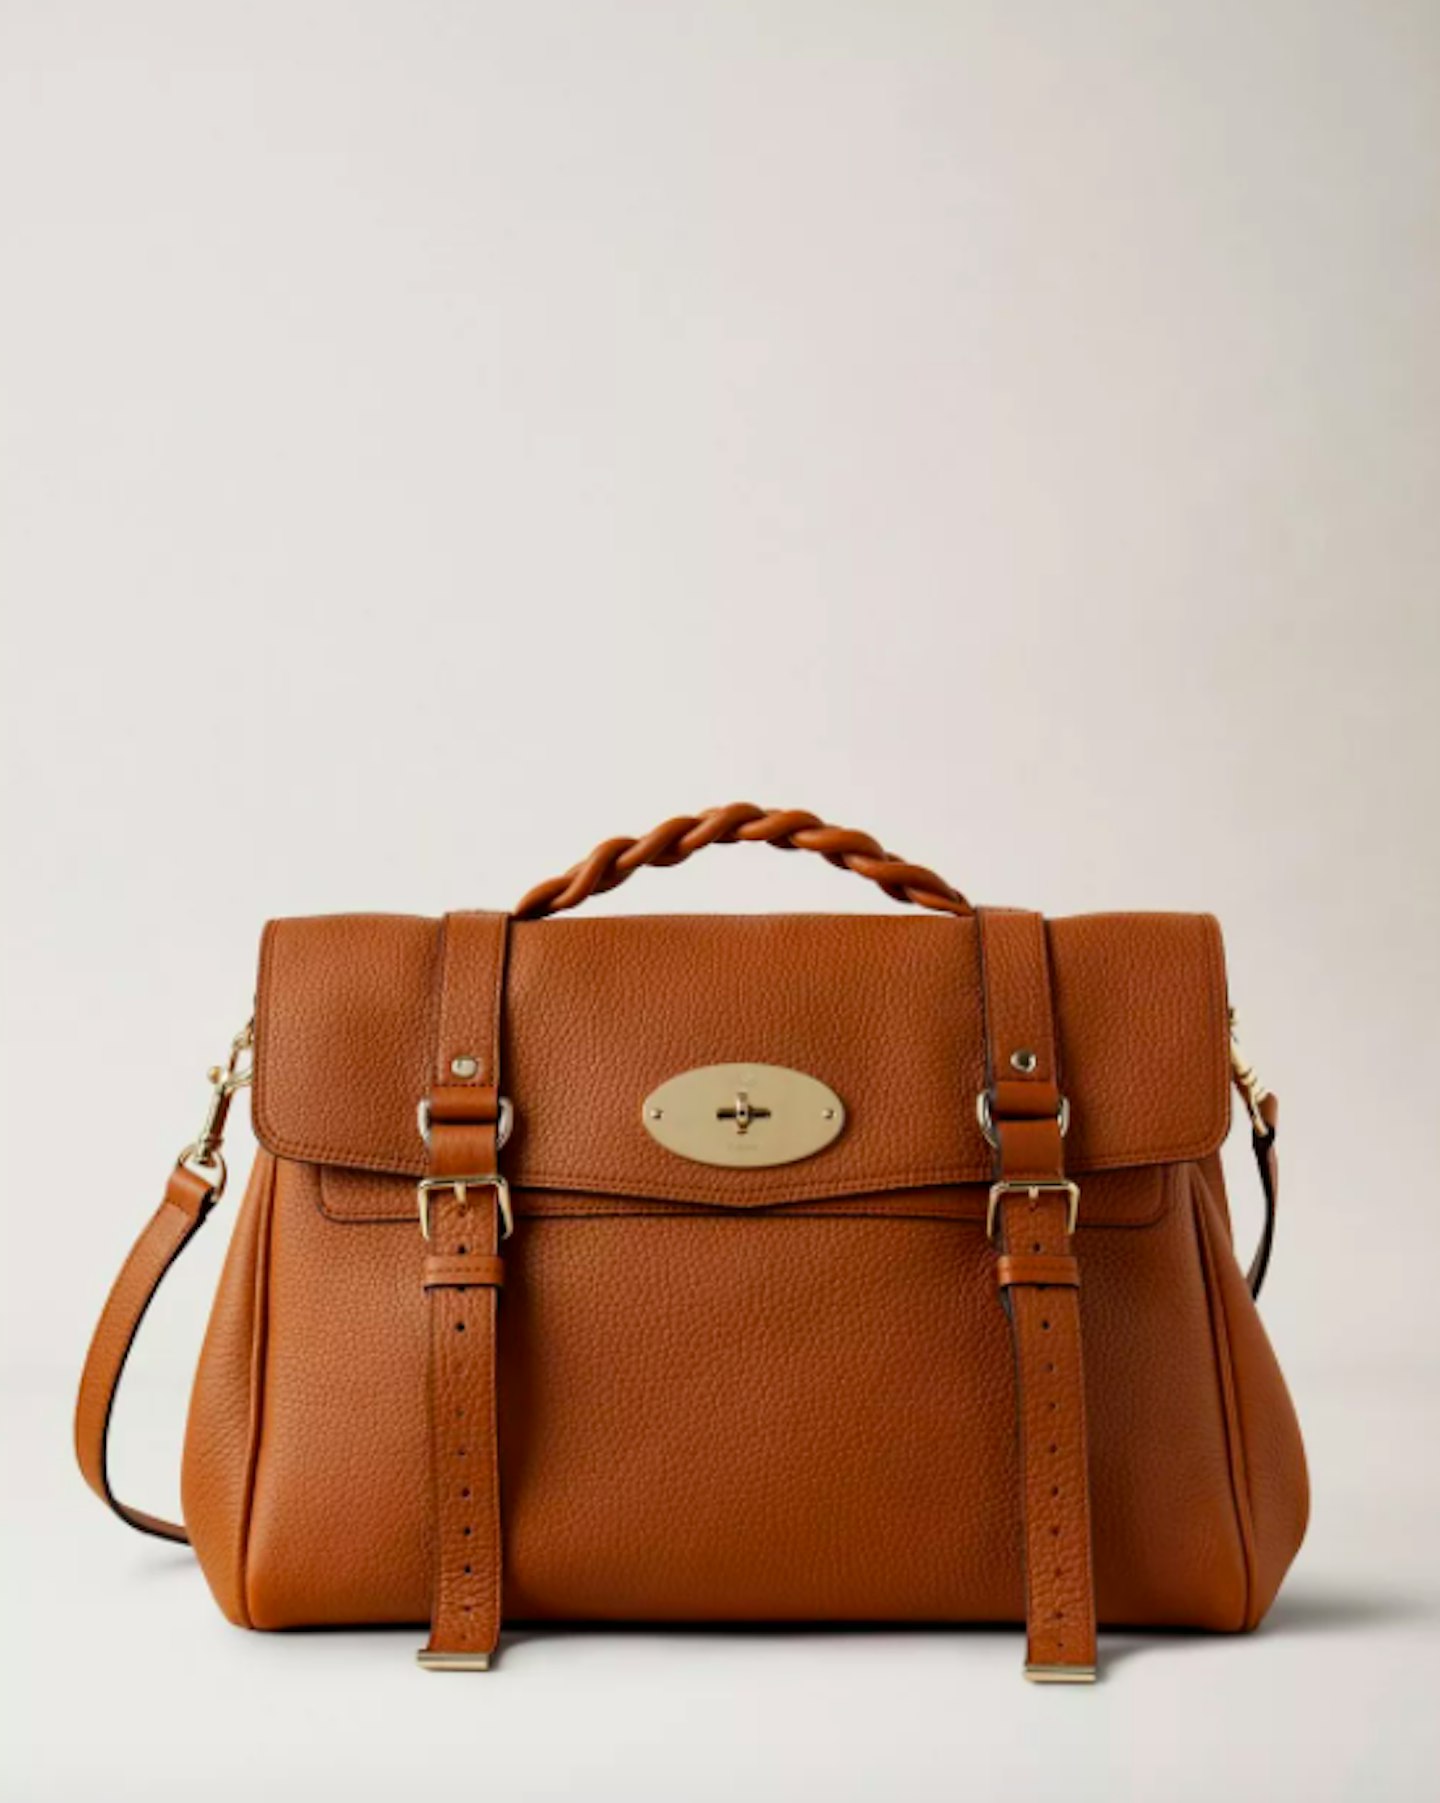 Mulberry Has Relaunched The Iconic Alexa - It's A Danielle Life